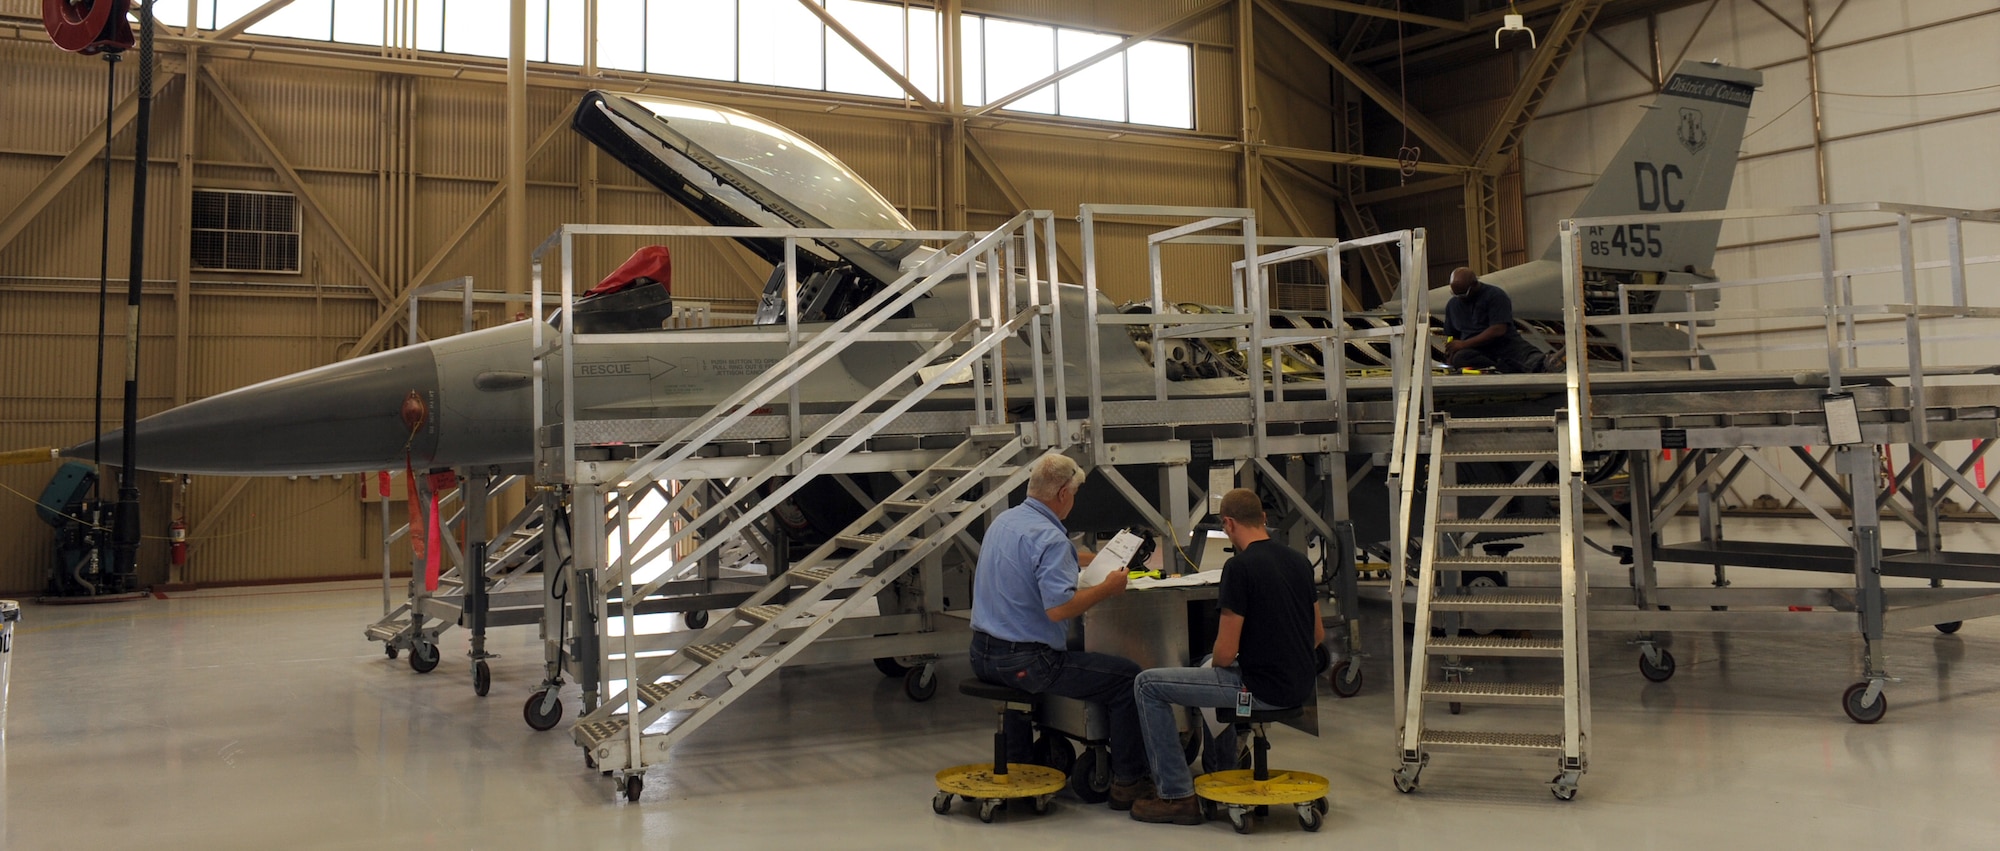 U.S. Air Force civilians from the 567th Aerospace Maintenance and Regeneration Squadron perform maintenance in the process of regenerating the first QF-16 at the 309th Aerospace Maintenance and Regeneration Group at Davis-Monthan Air Force Base, Ariz., July 9, 2013. The F-16s destined for the drone program have been in storage from three to 12 years they will complete all time compliance technical orders required for test flights during maintenance activities. (U.S. Air Force photo by Senior Airman Christine Griffiths/Released)